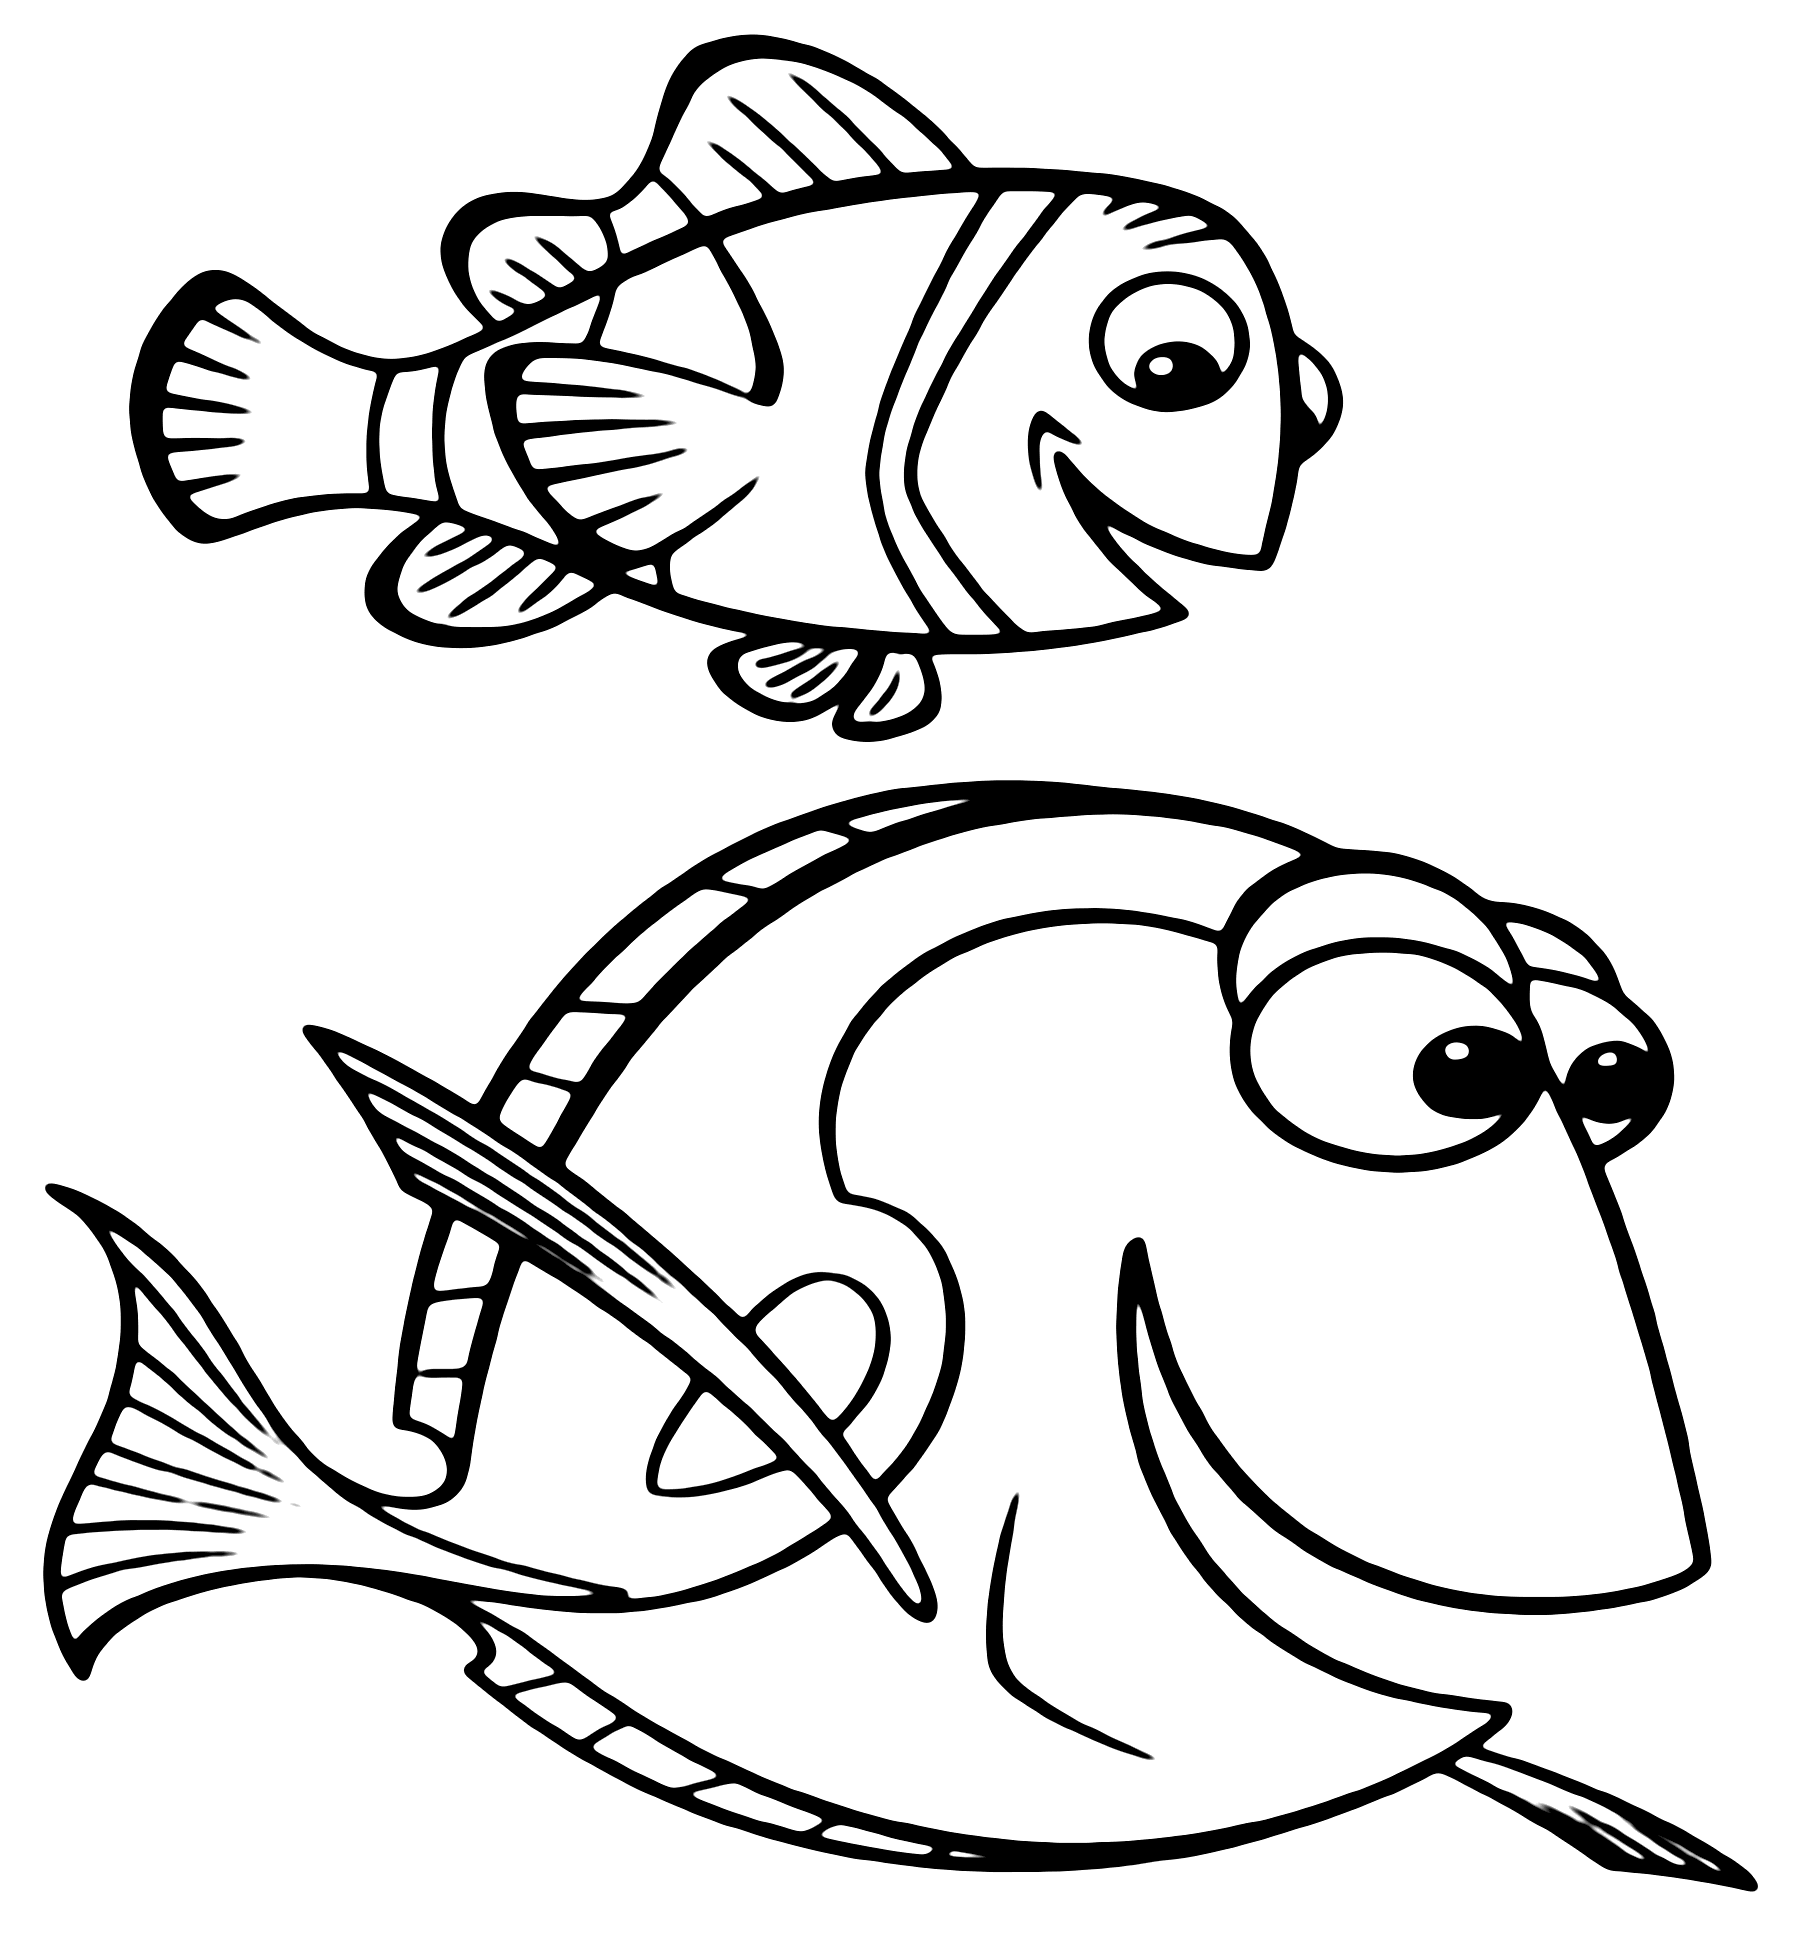 Coloring Page of Nemos Father and Dory in Search of Nemo